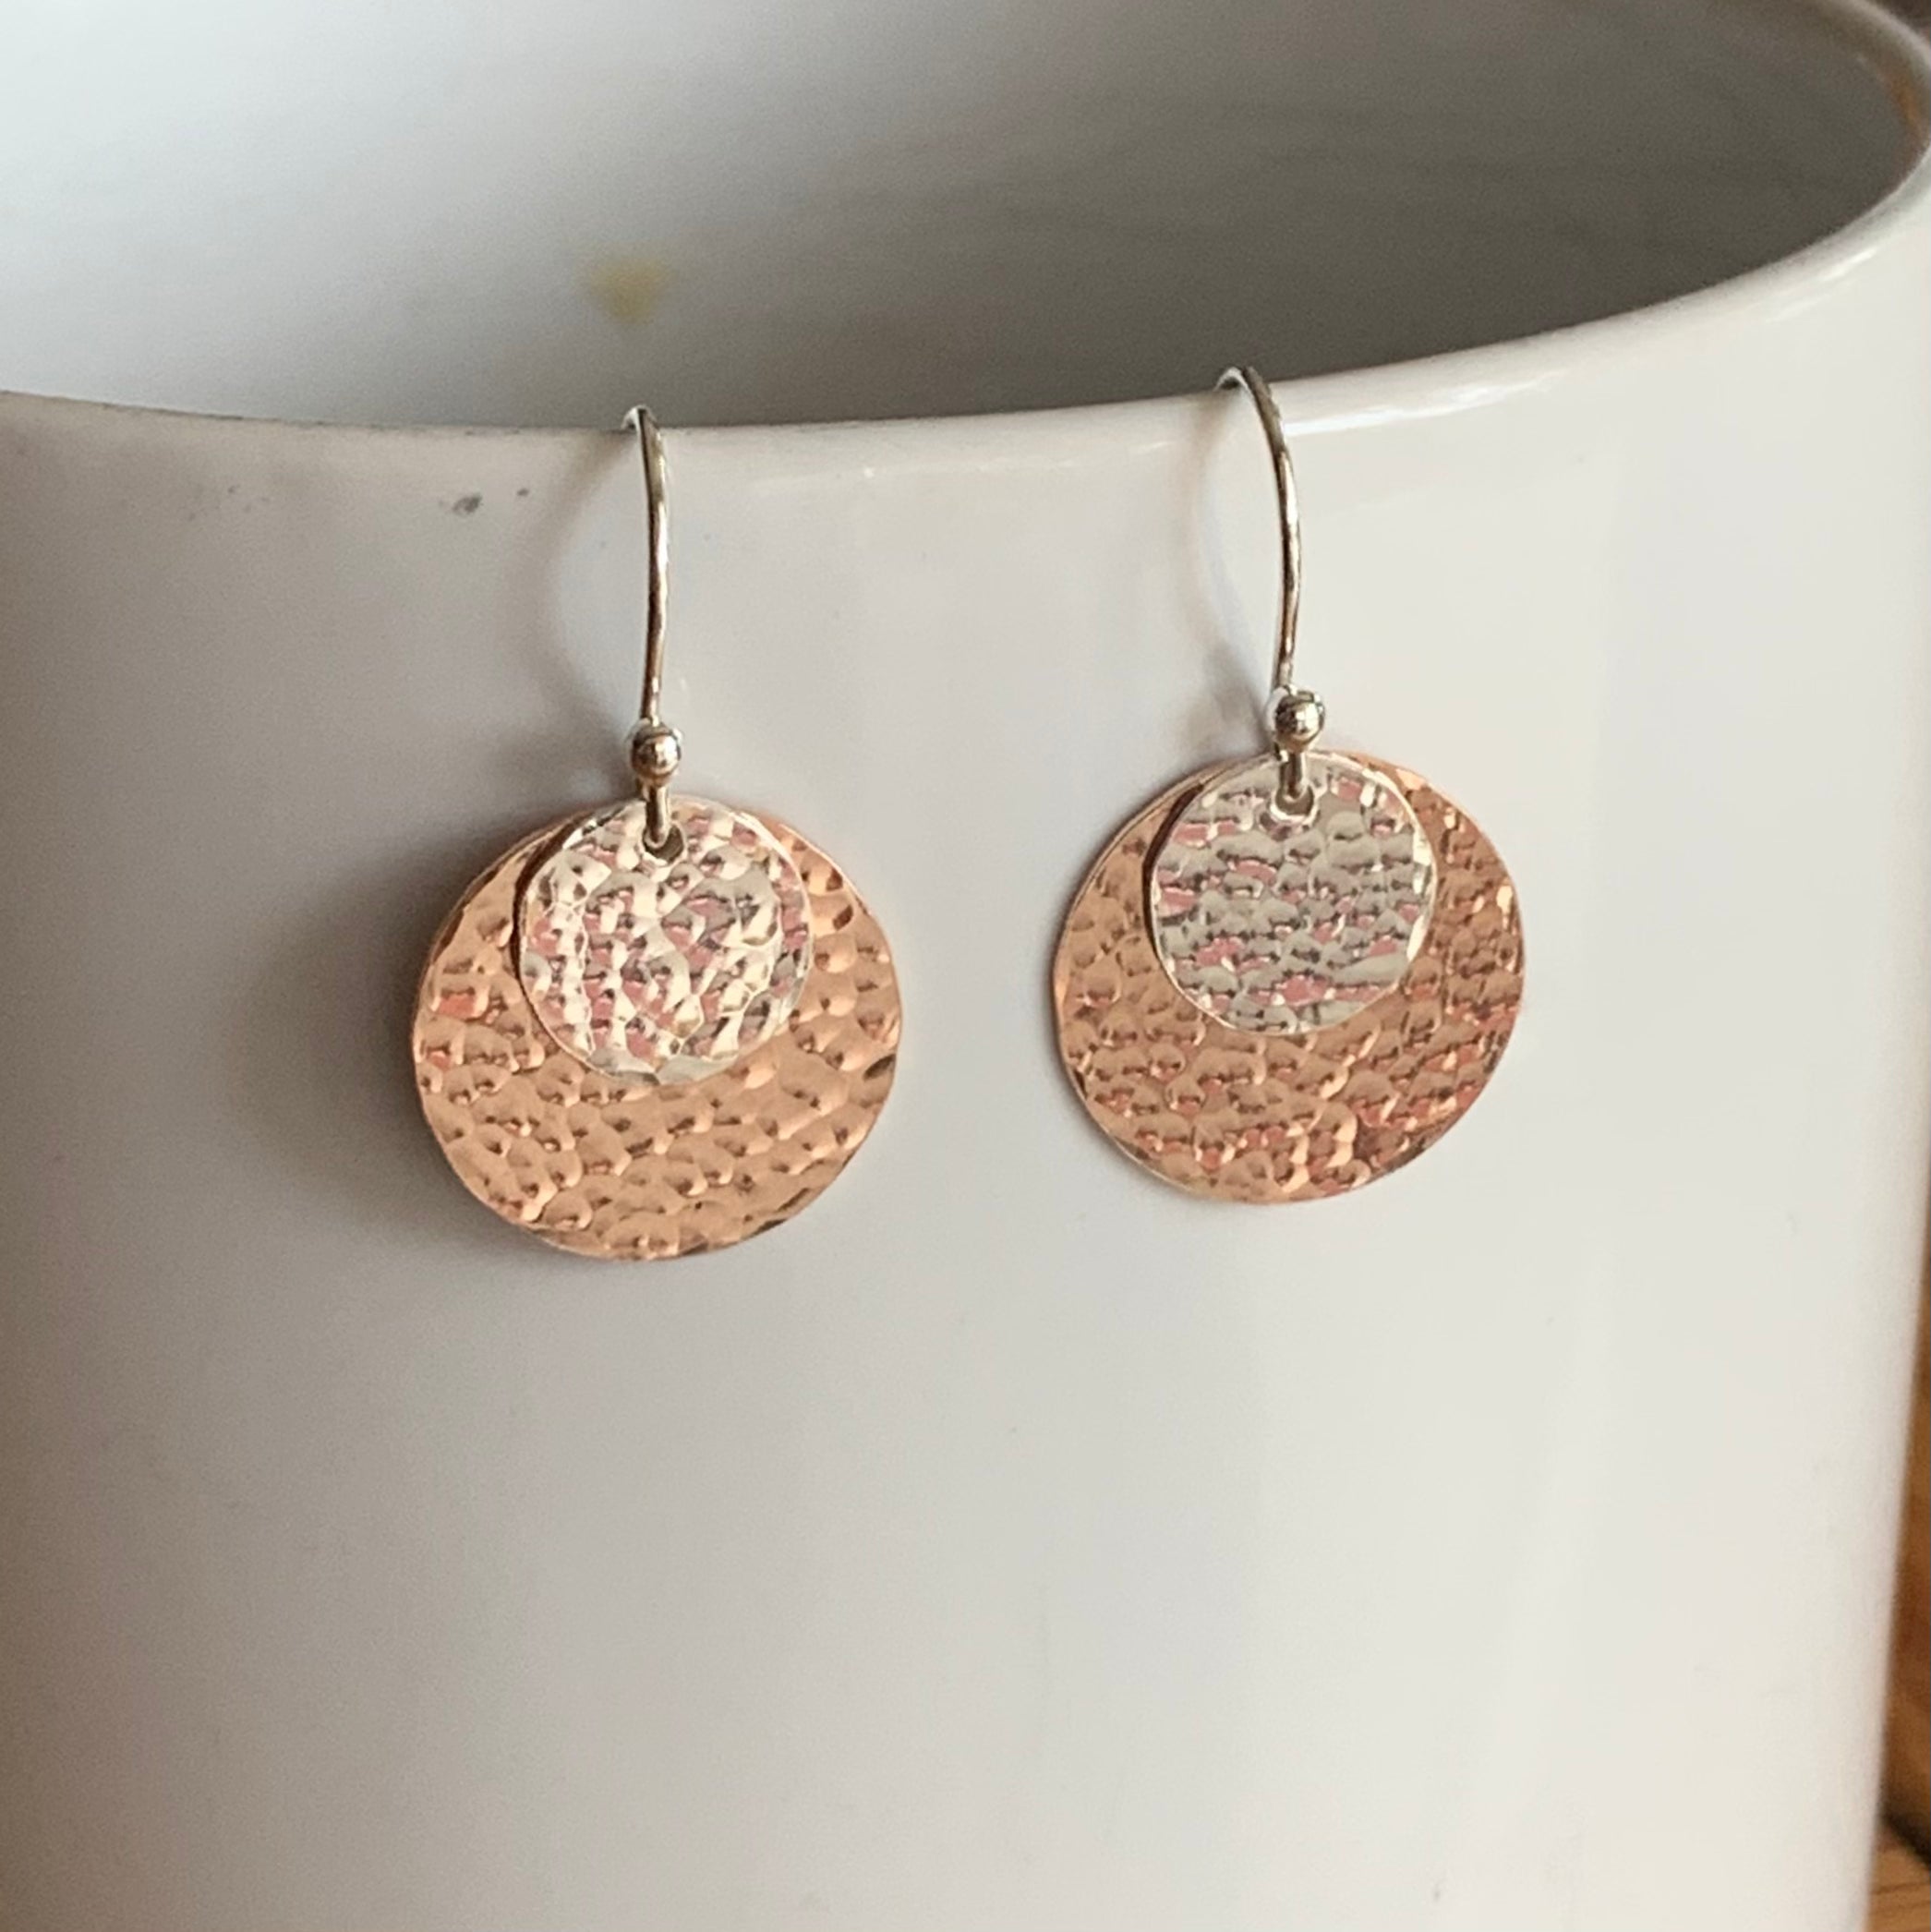 Hammered earrings mixed metal rose gold filled and sterling silver geometric